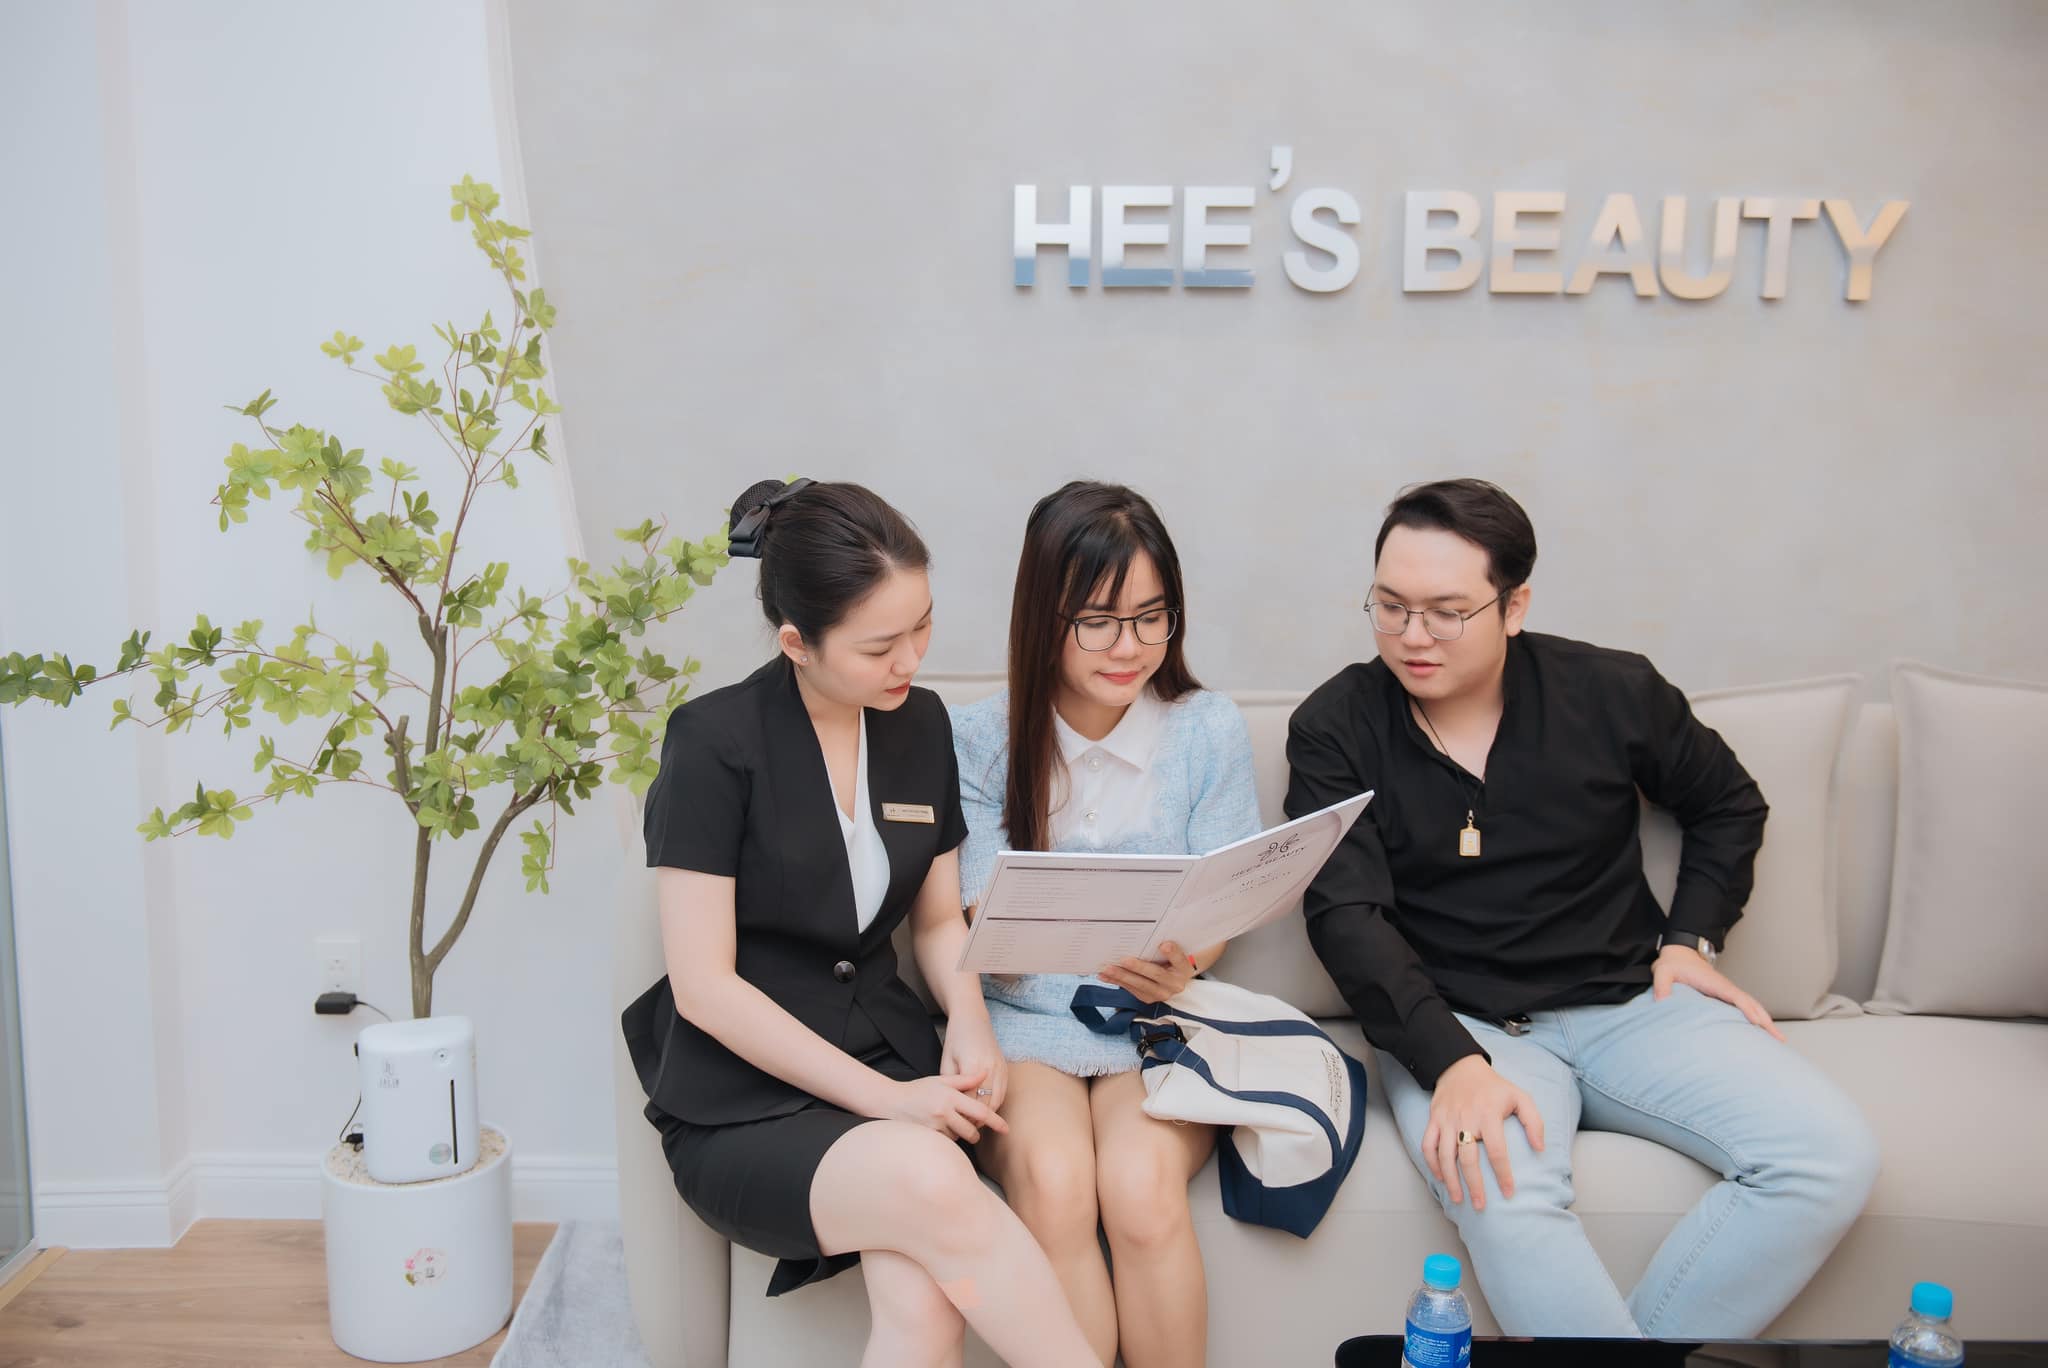 Hee’s-Beauty-la-Dai-ly-than-thiet-cua-Physiodermie